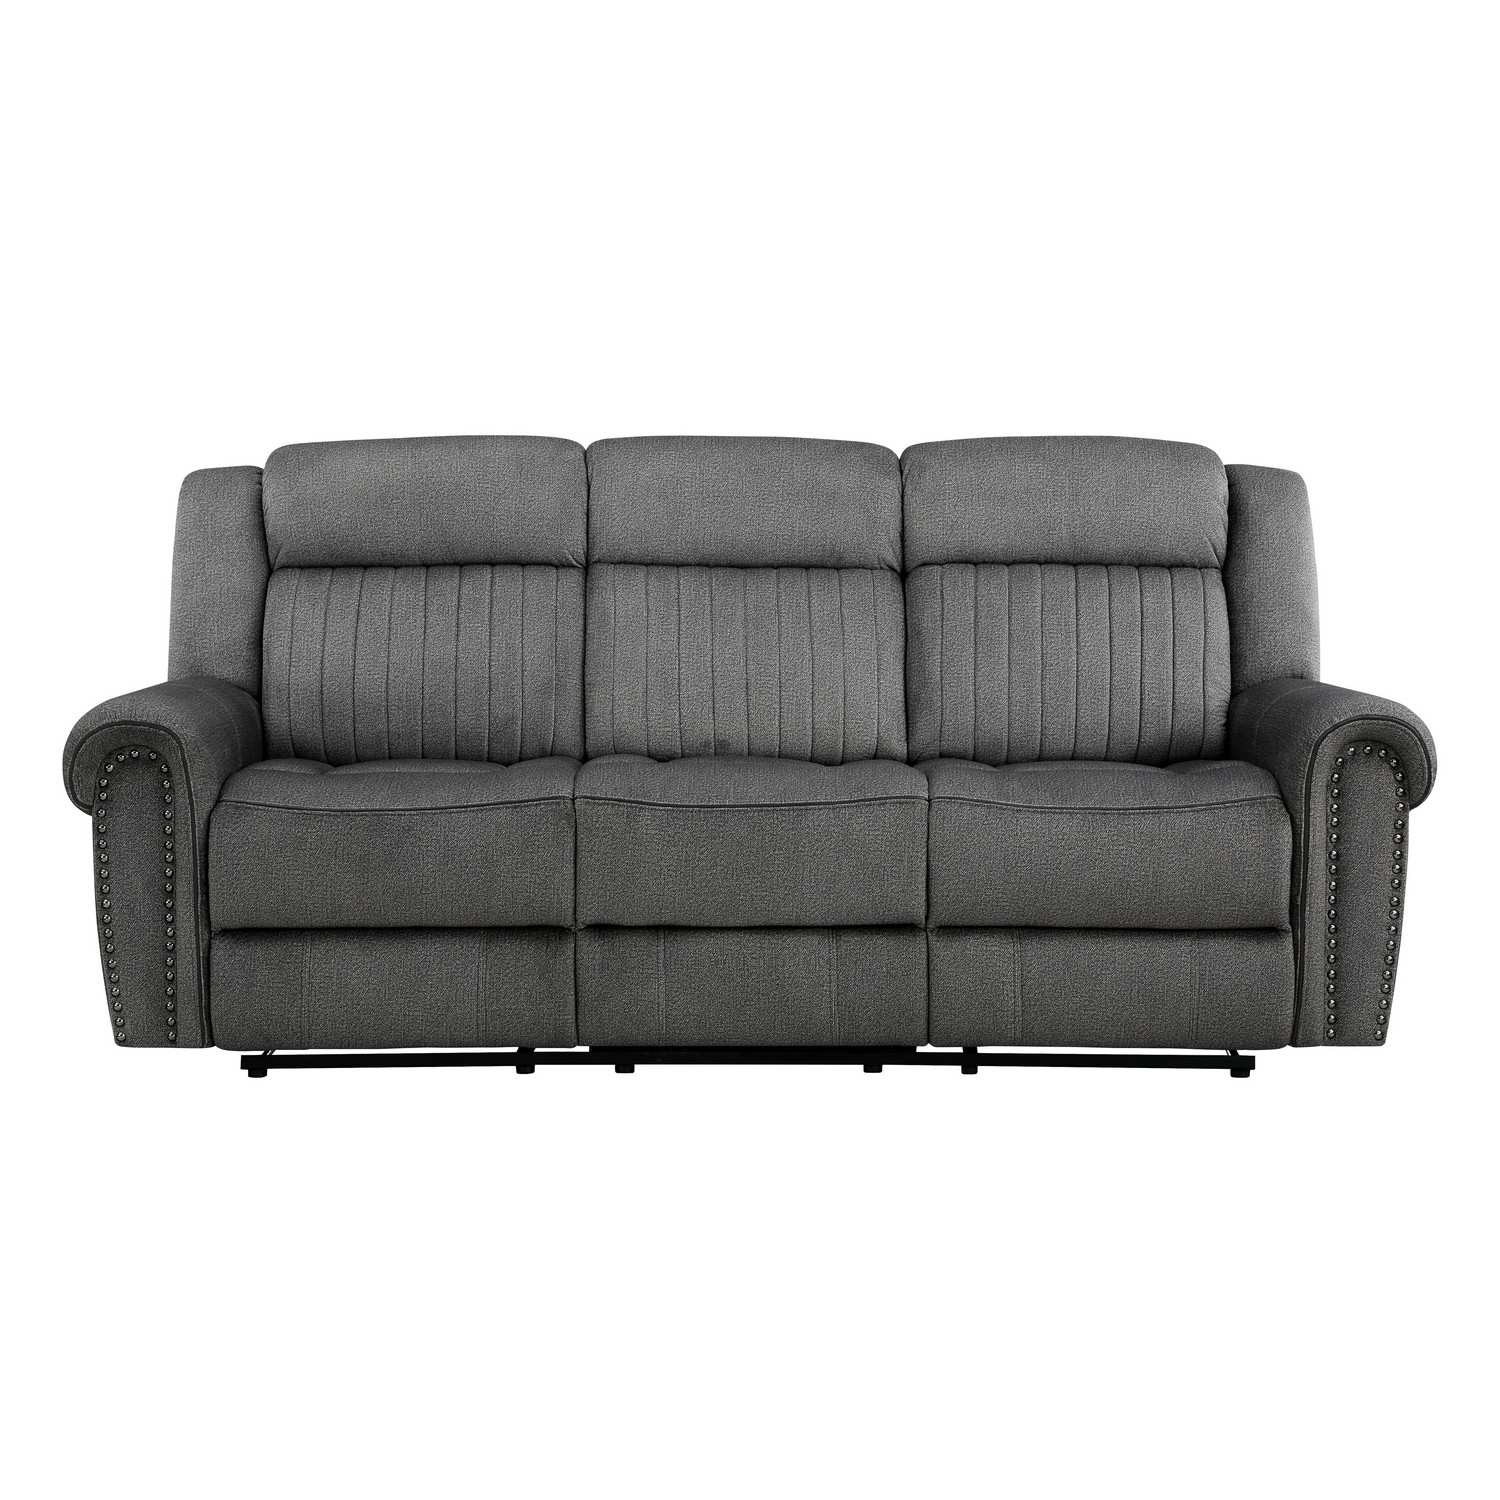 Homelegance Brennen Double Reclining Sofa - Charcoal